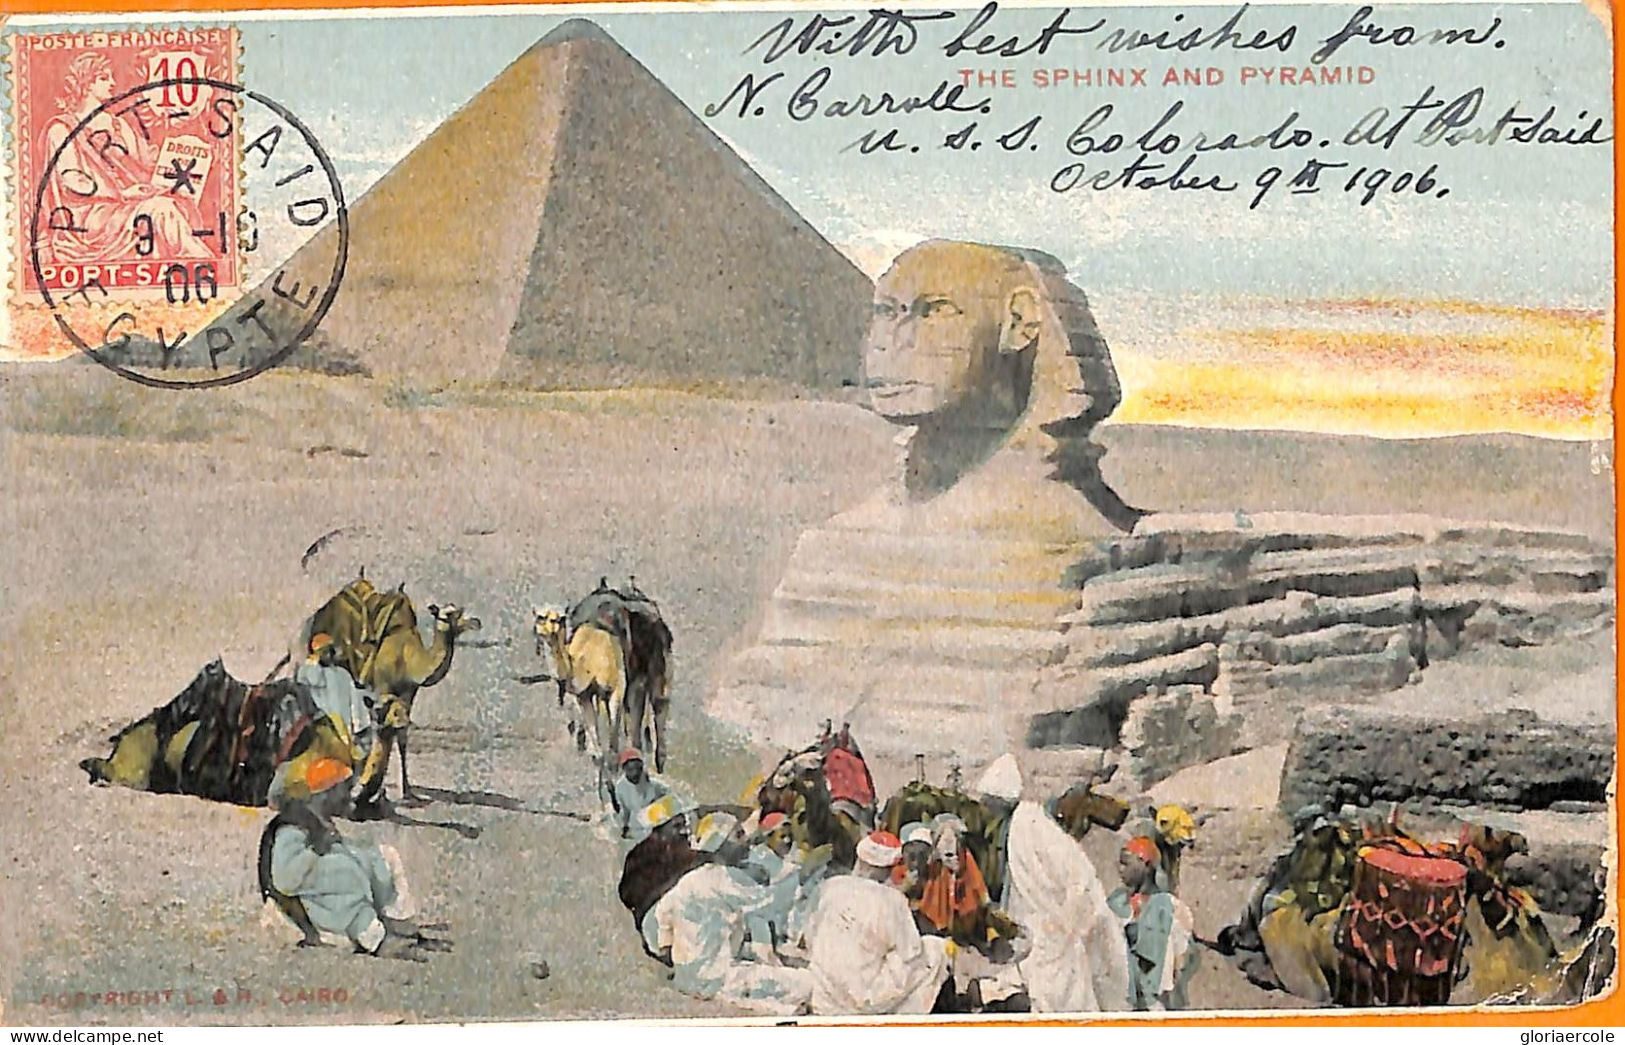 Aa0161 - FRENCH Port Said  EGYPT - POSTAL HISTORY - POSTCARD 1906 - Lettres & Documents